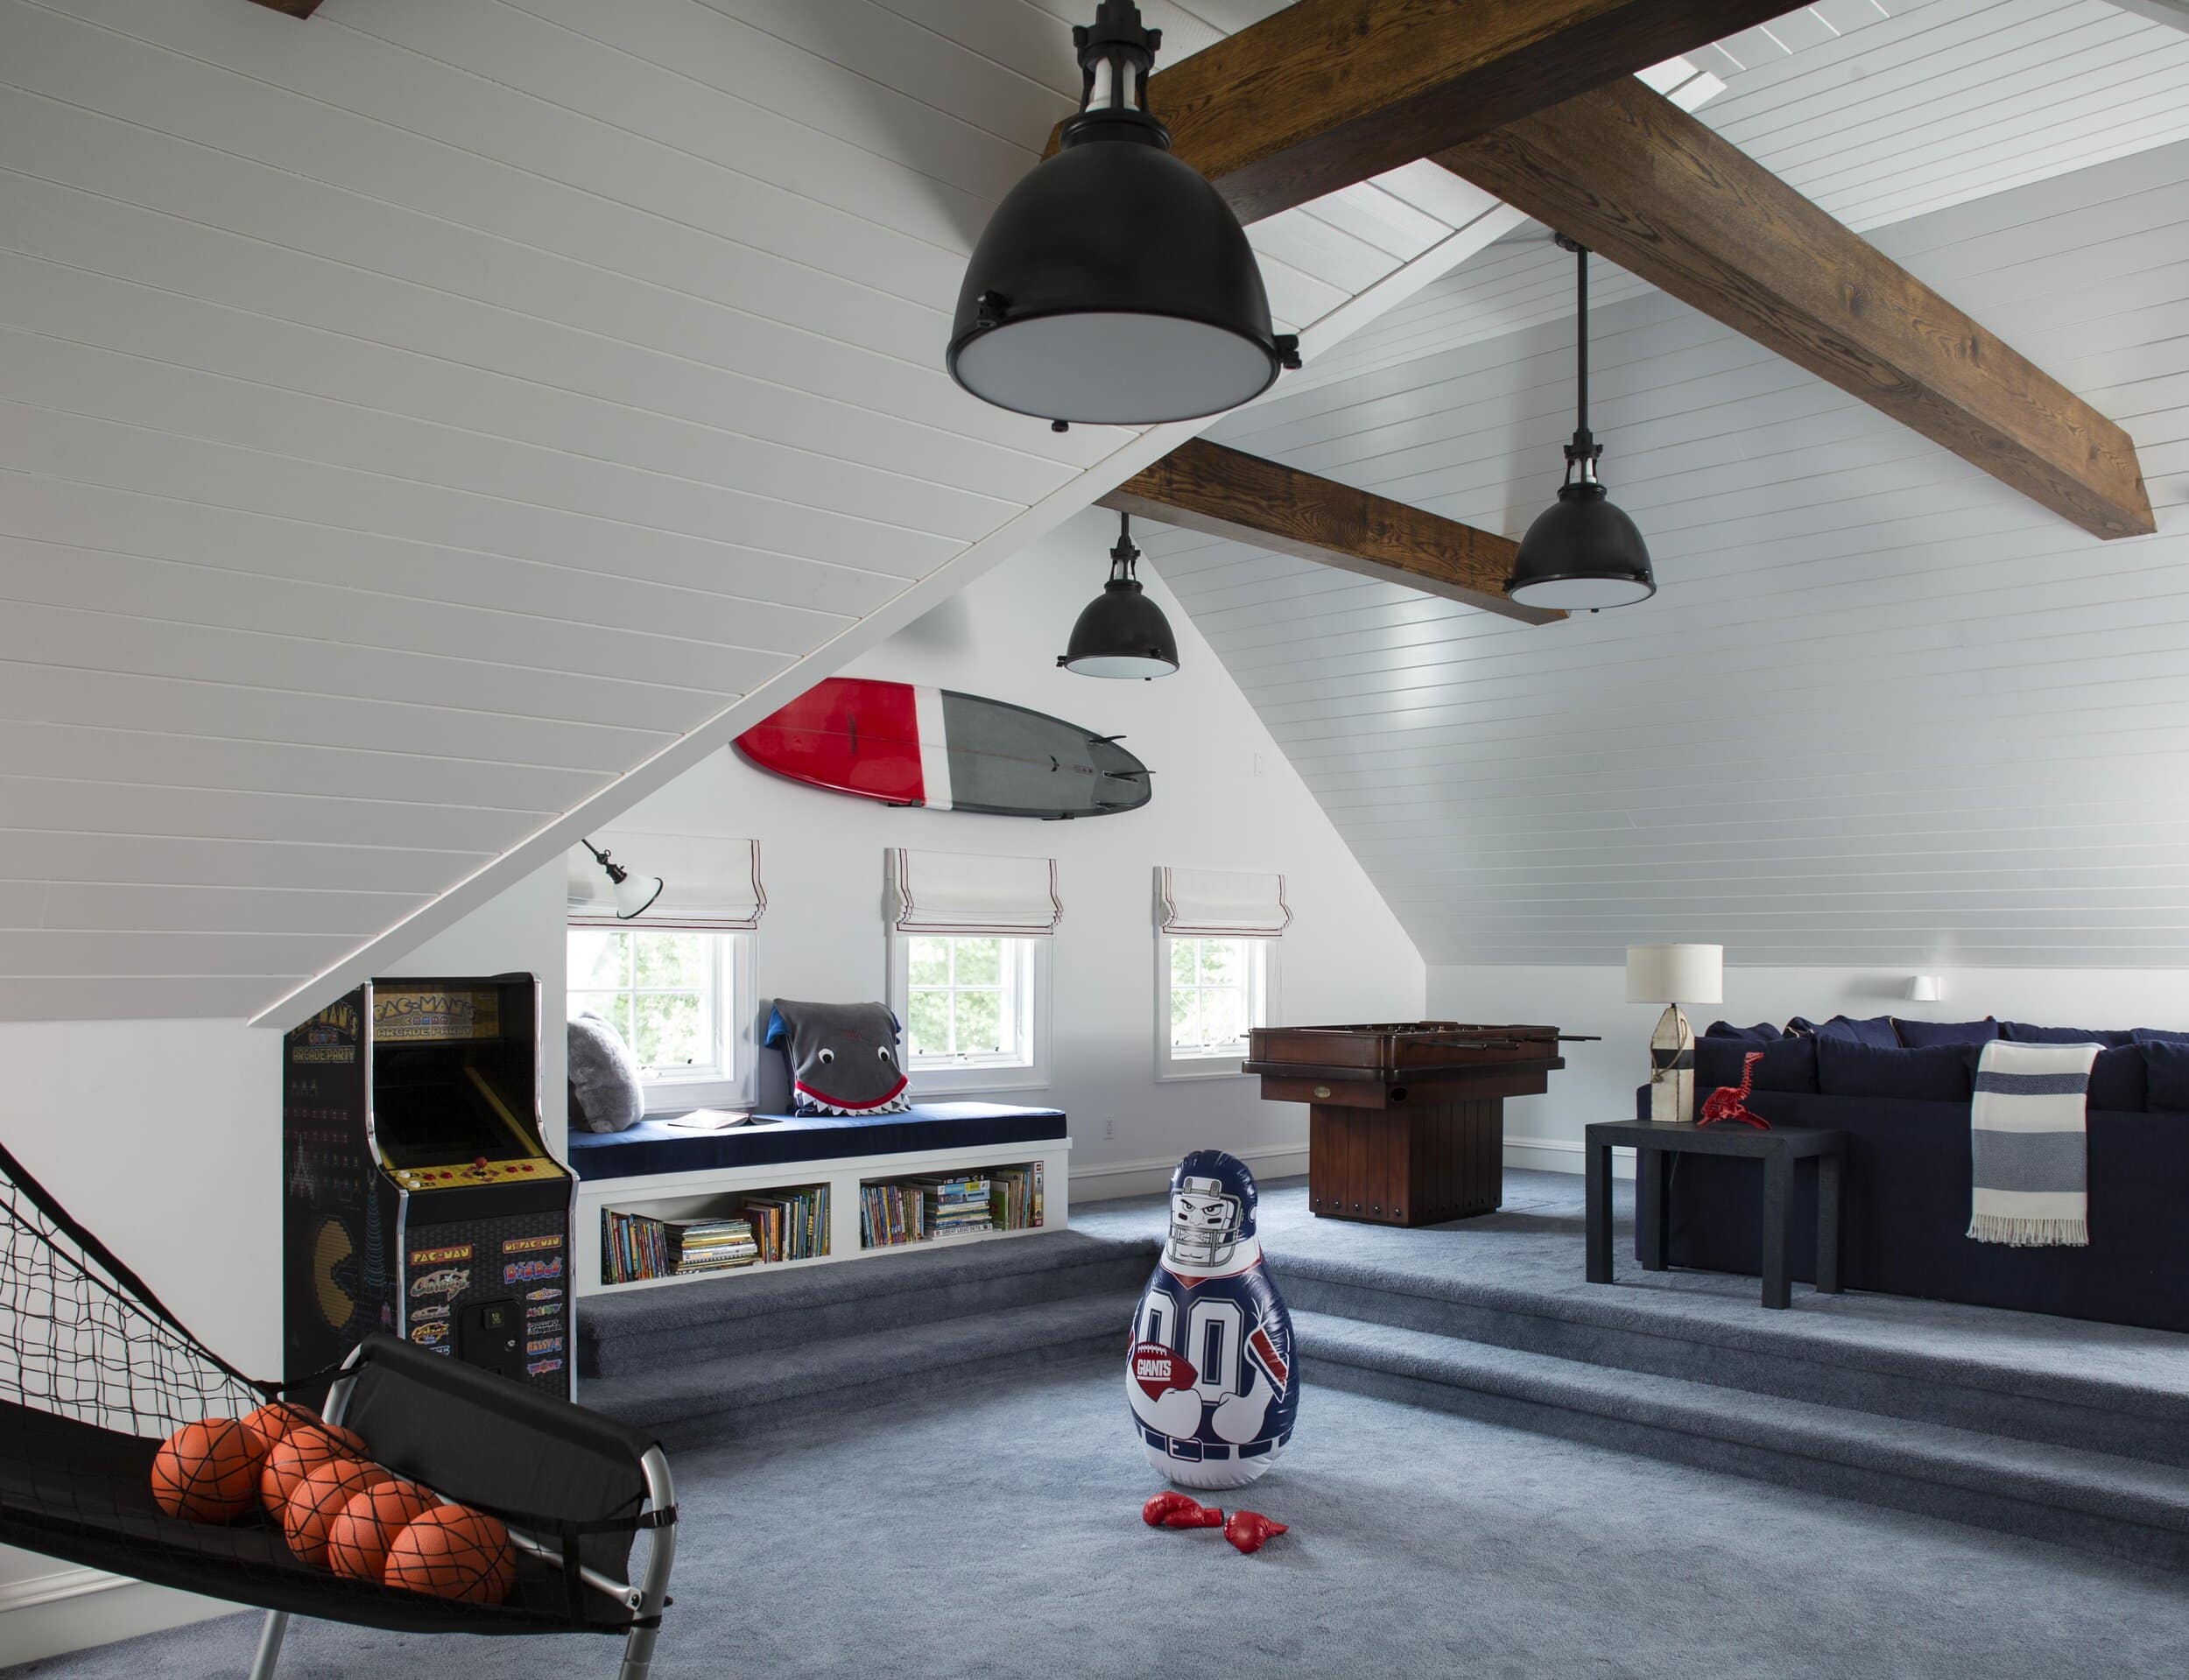 This empty attic, becomes a bright open and airy play space with basketball, foosball and old school video games.